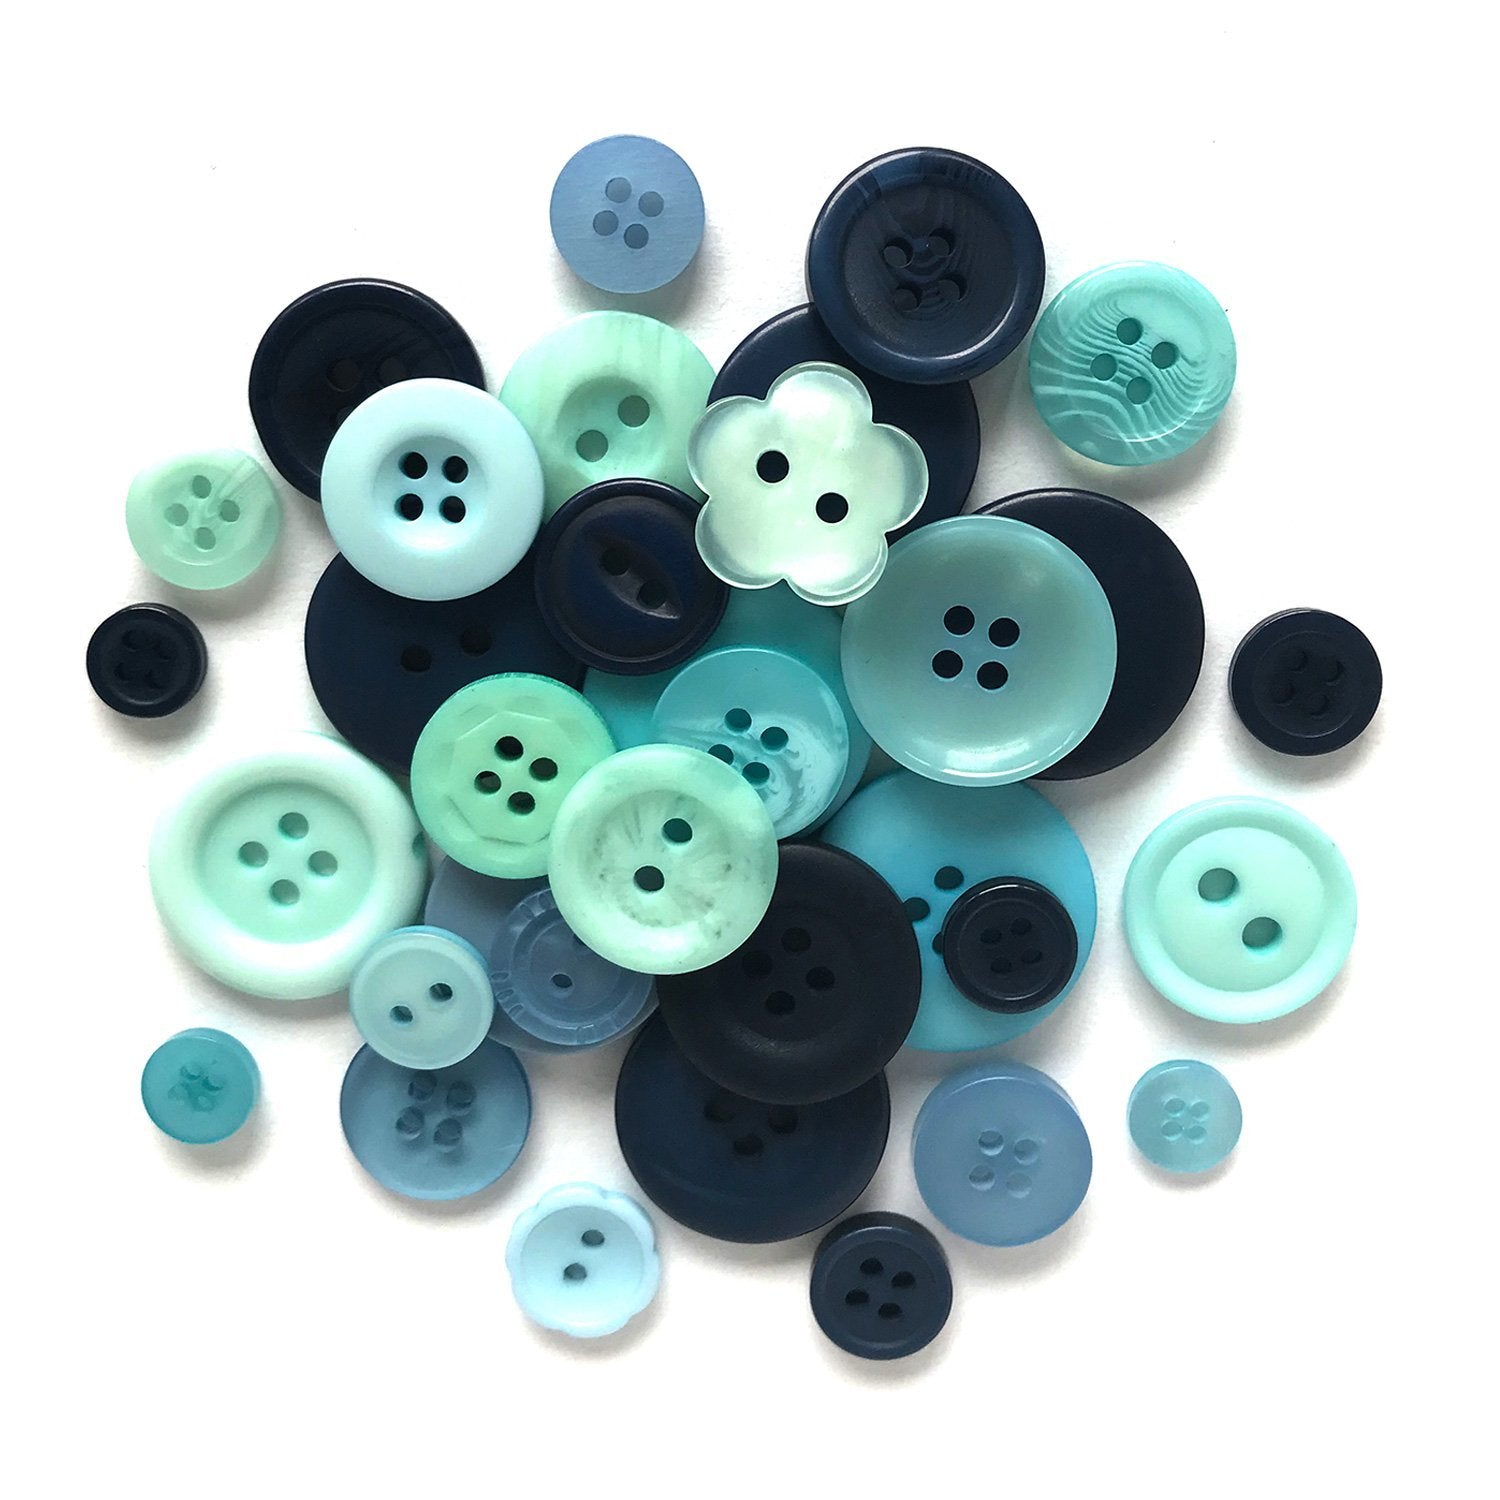 12 Pcs Navy Buttons - 4 Hole 18l Buttons for Sewing Size 0,35” 0,4” 0,45”  Round Buttons for Crafts & DIY – Plastic 9,10,11mm Buttons - Sewing